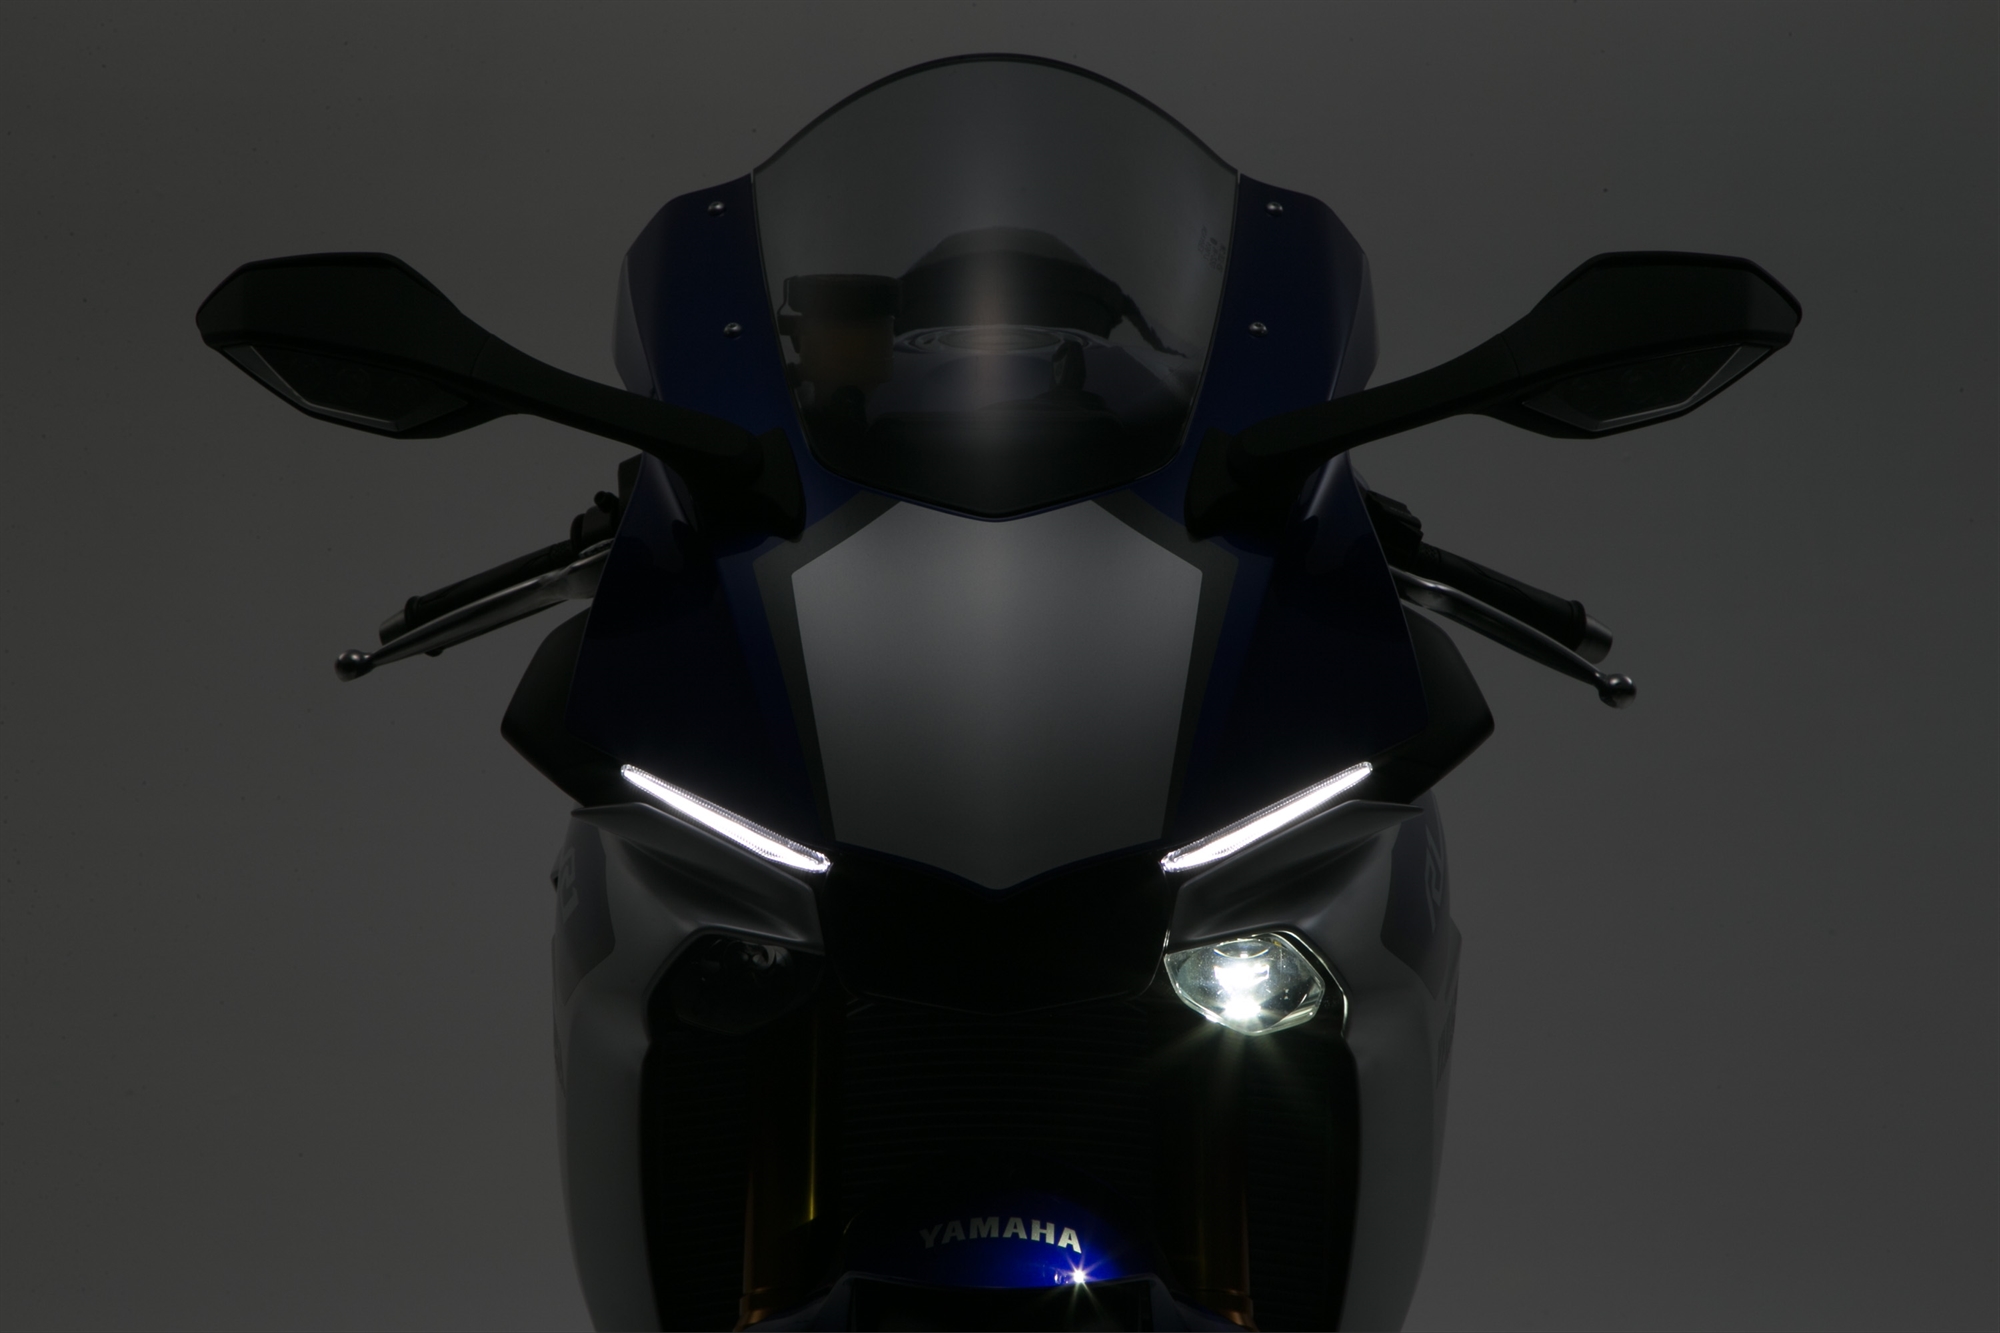 2015 Yamaha YZF-R1 Studio and Action Shots Show More Superbike Goodness